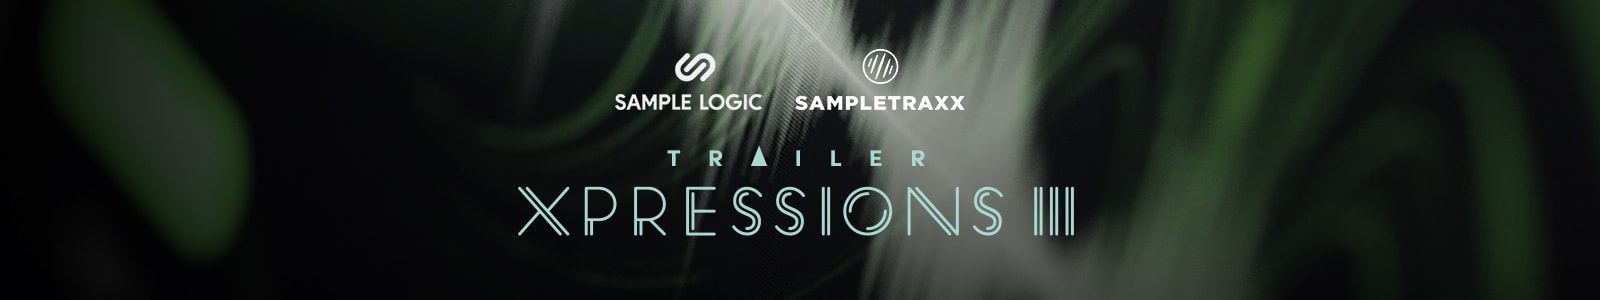 Trailer Xpressions 3 by Sample Logic